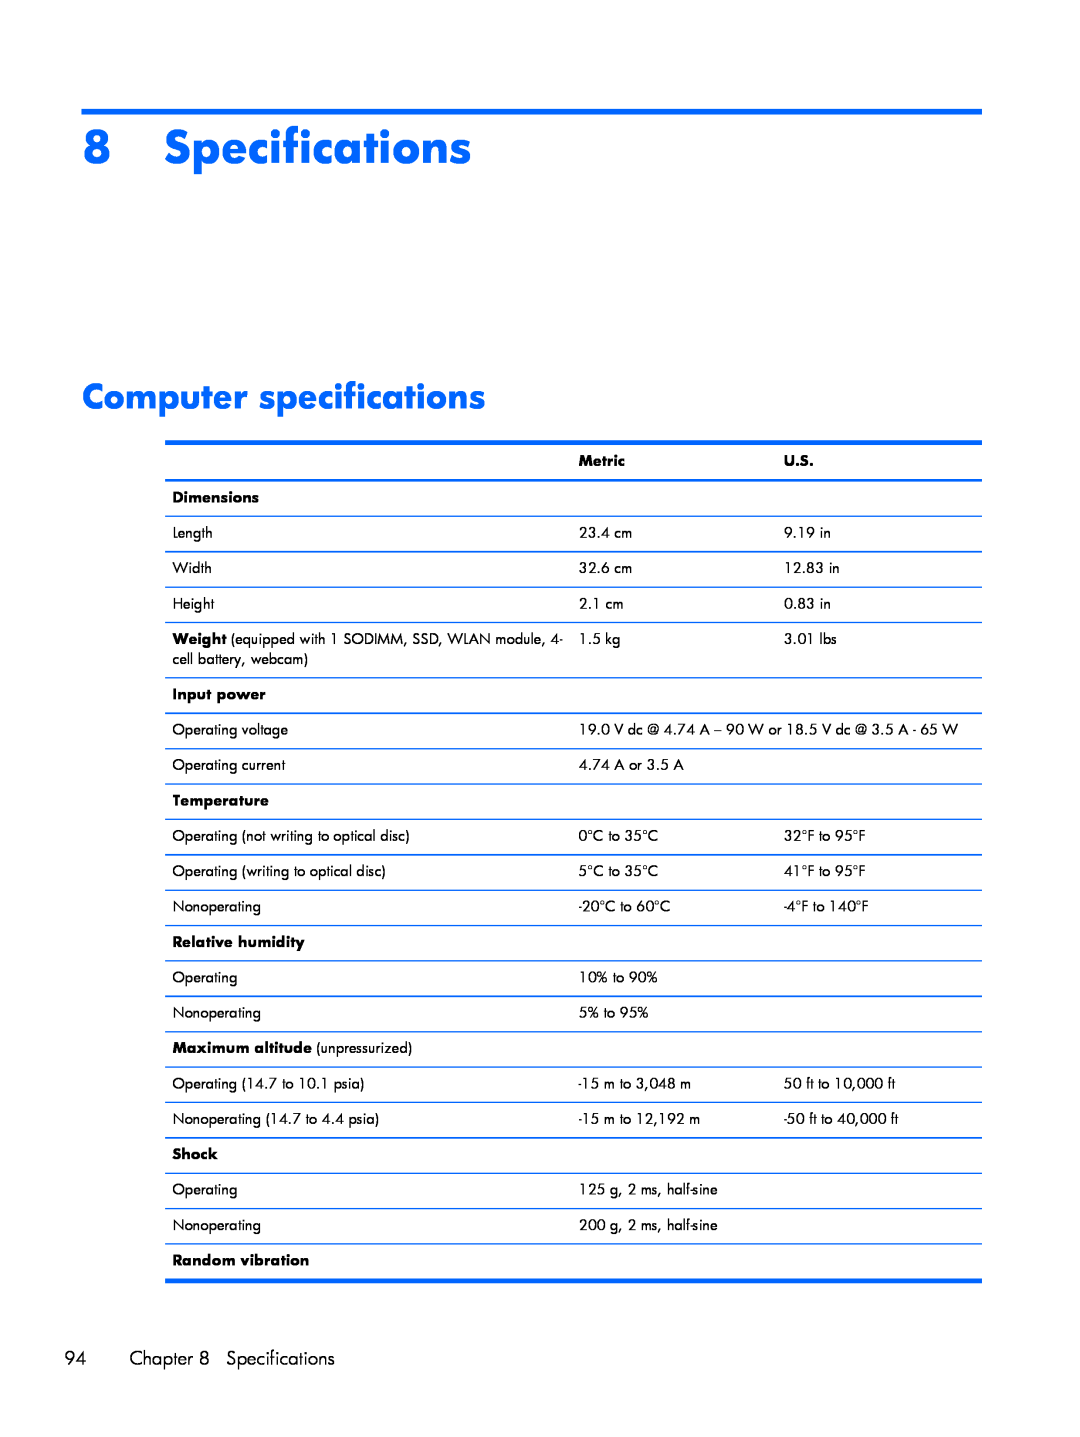 HP 430 G1 E3U93UTABA manual Specifications, Computer specifications, Metric, Dimensions, Input power, Temperature, Shock 